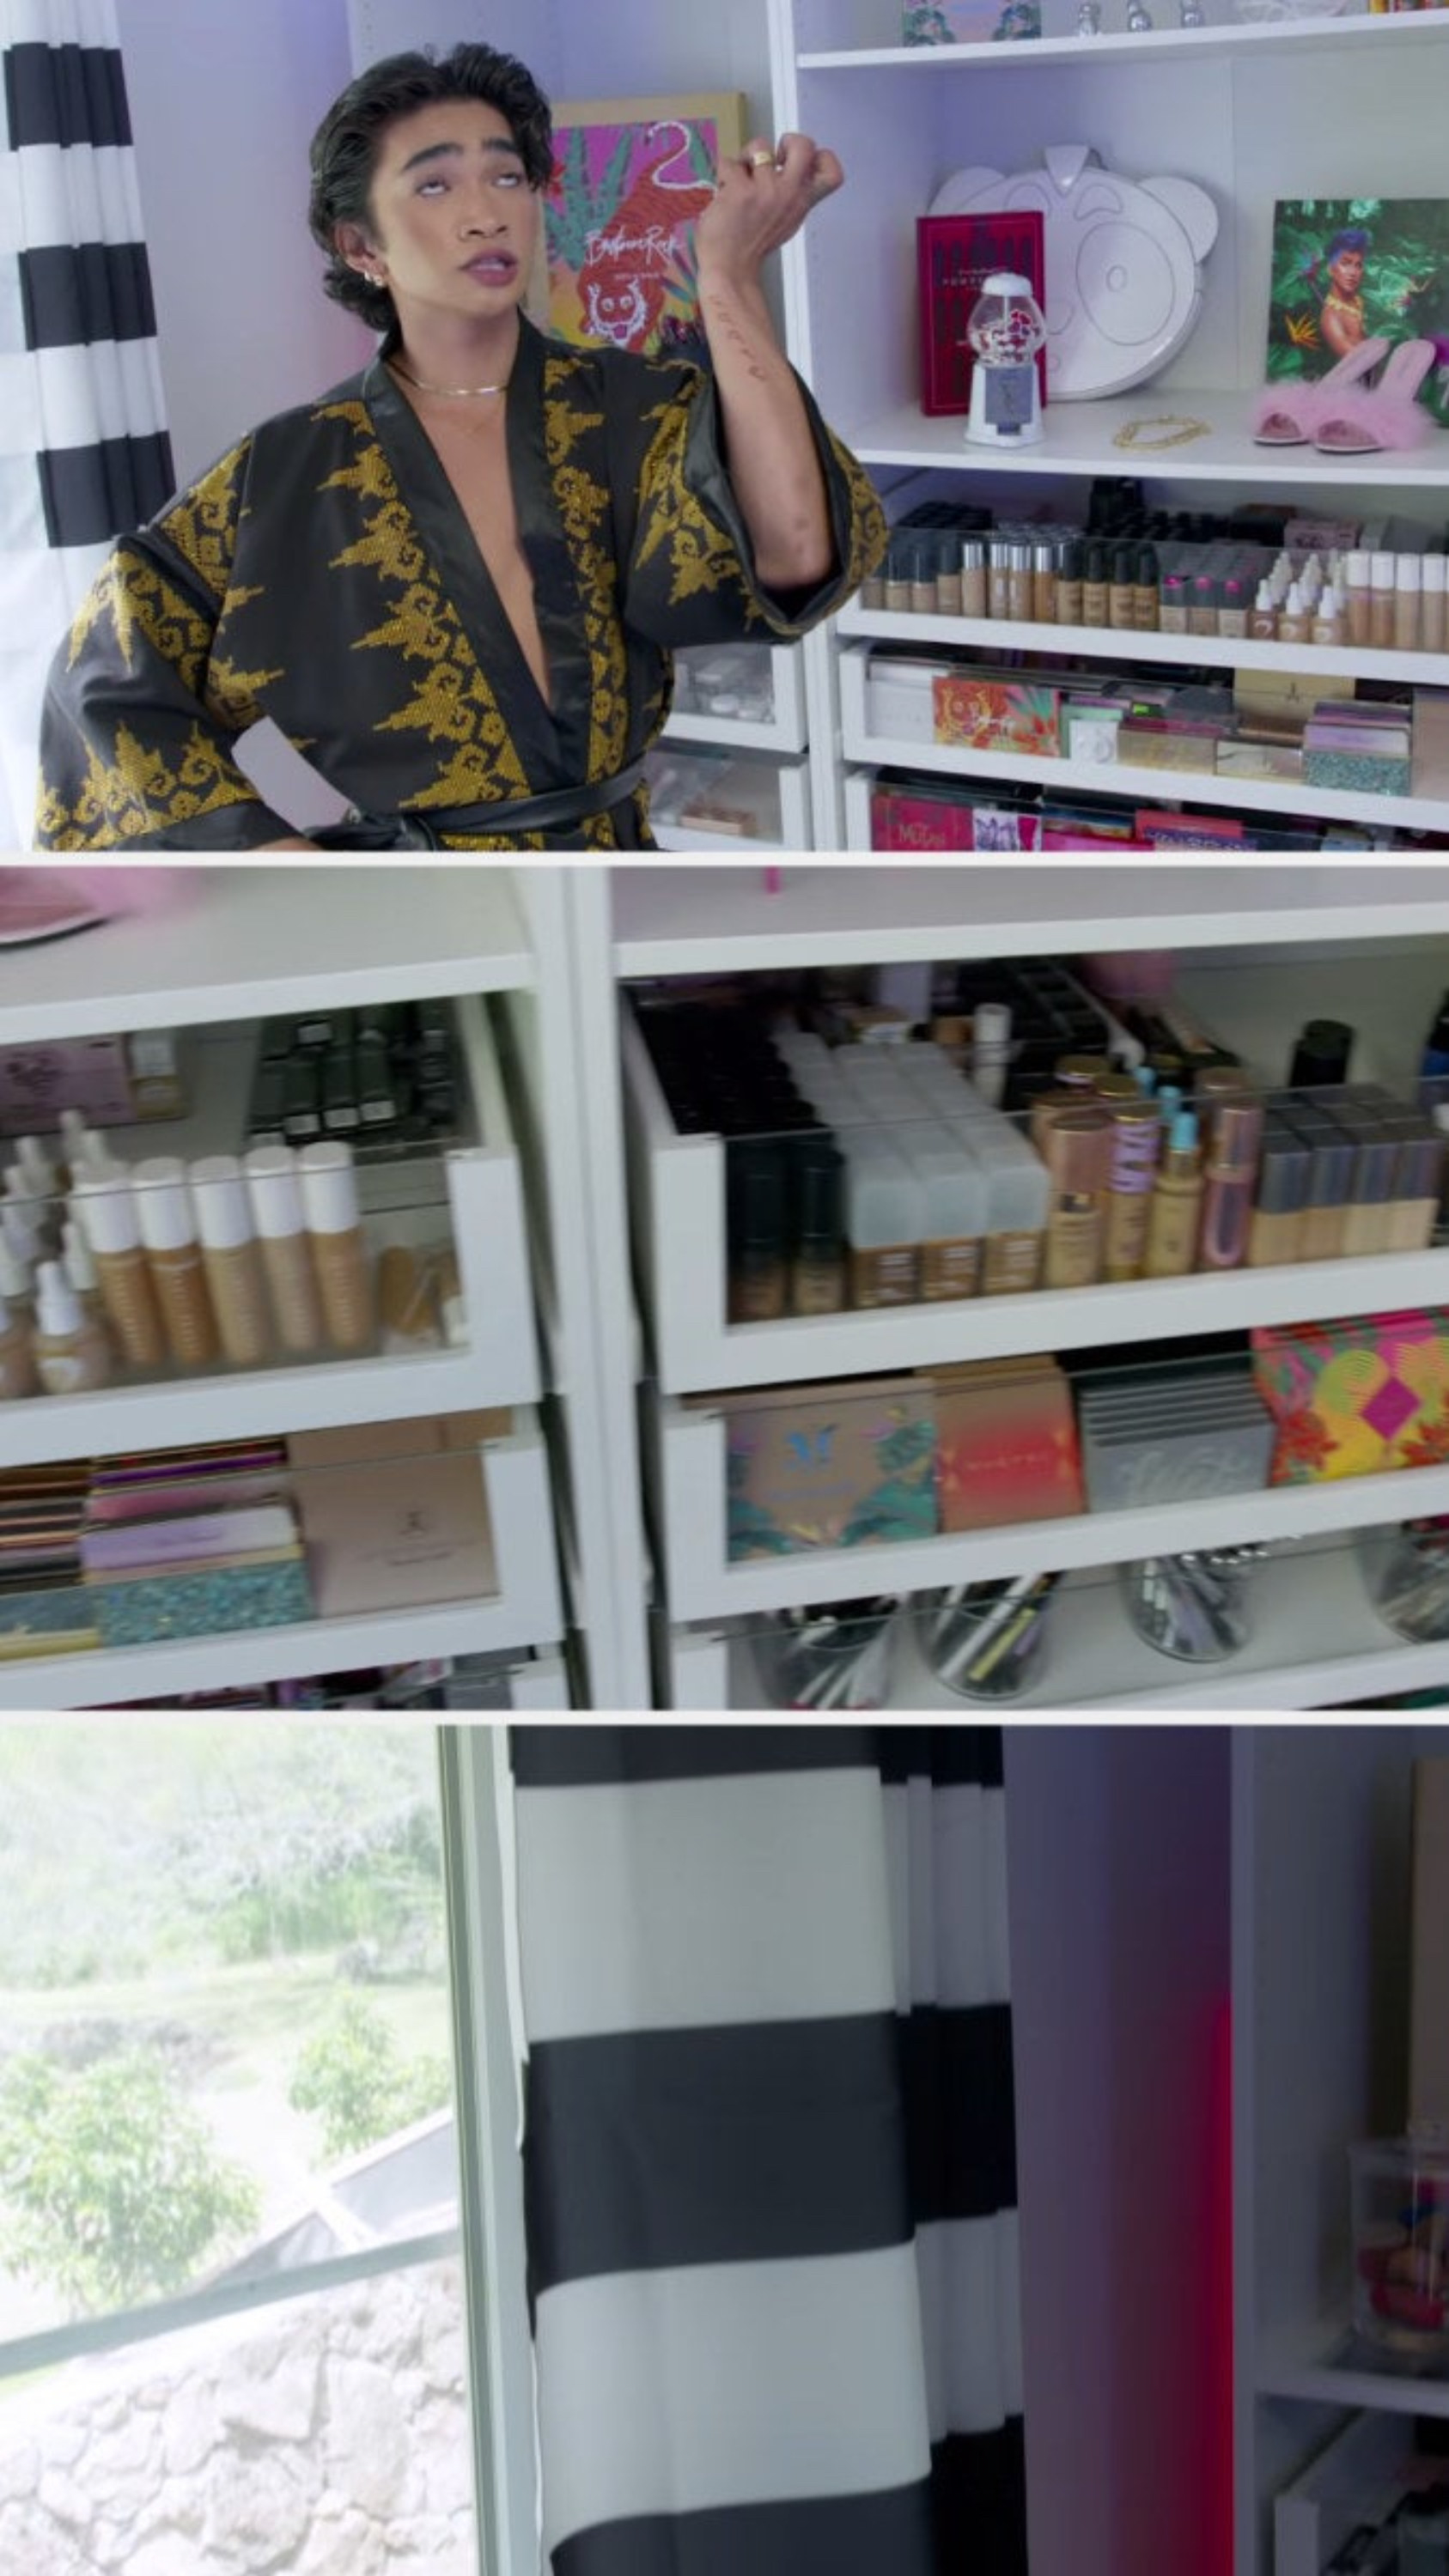 Bretman saying, &quot;I literally have sephora in my house&quot;, shelves upon shelves of makeup, and sephora themed curtains